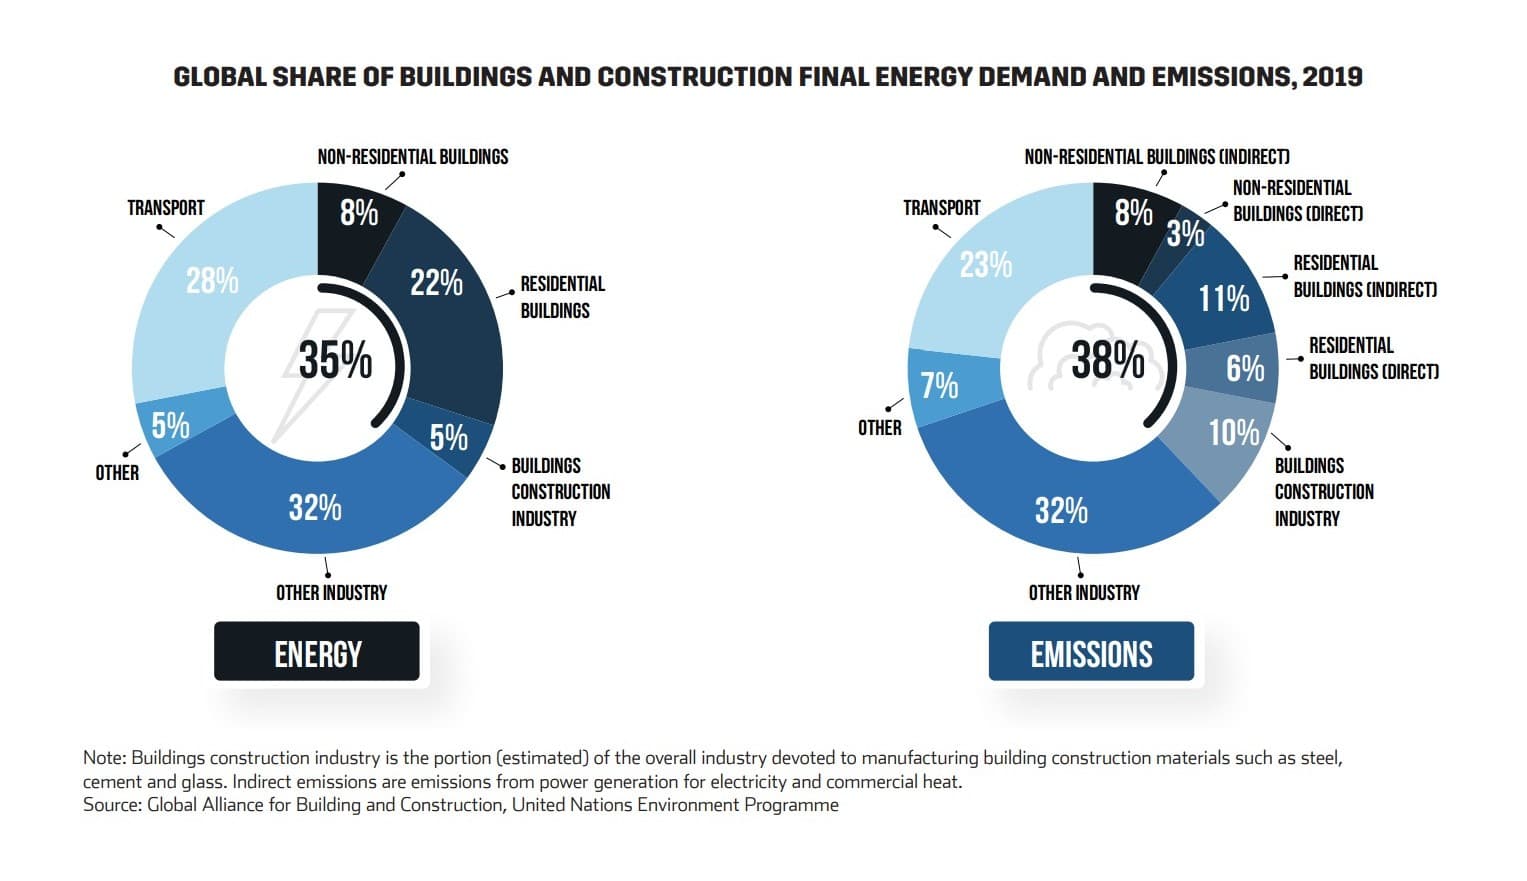 Global Share of Buildings and Construction Final Energy Demand and Emissions 2019